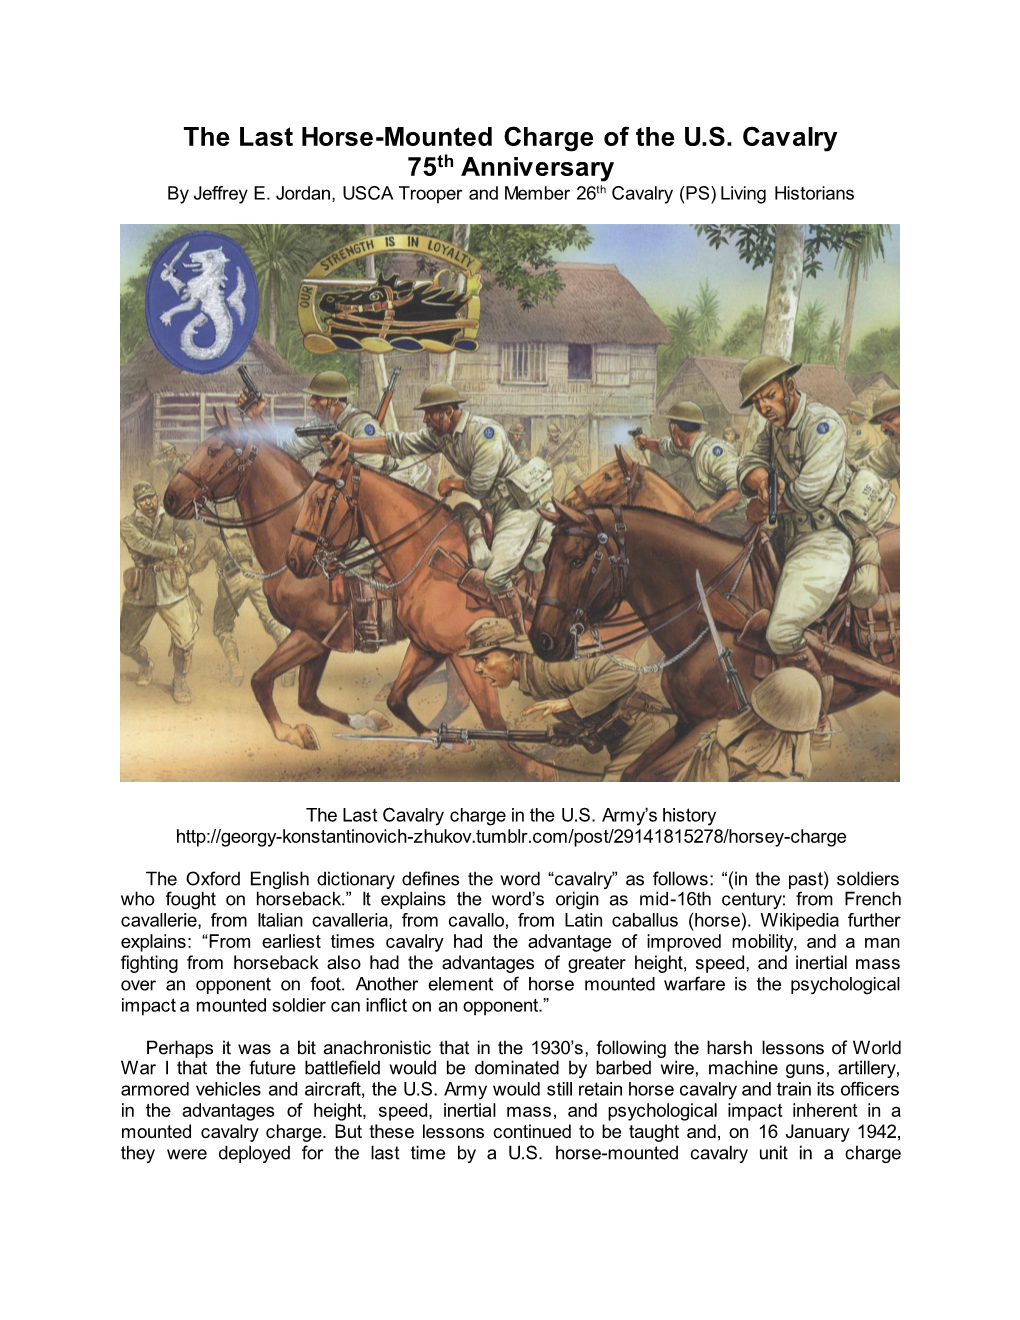 The Last Horse-Mounted Charge of the U.S. Cavalry 75Th Anniversary by Jeffrey E